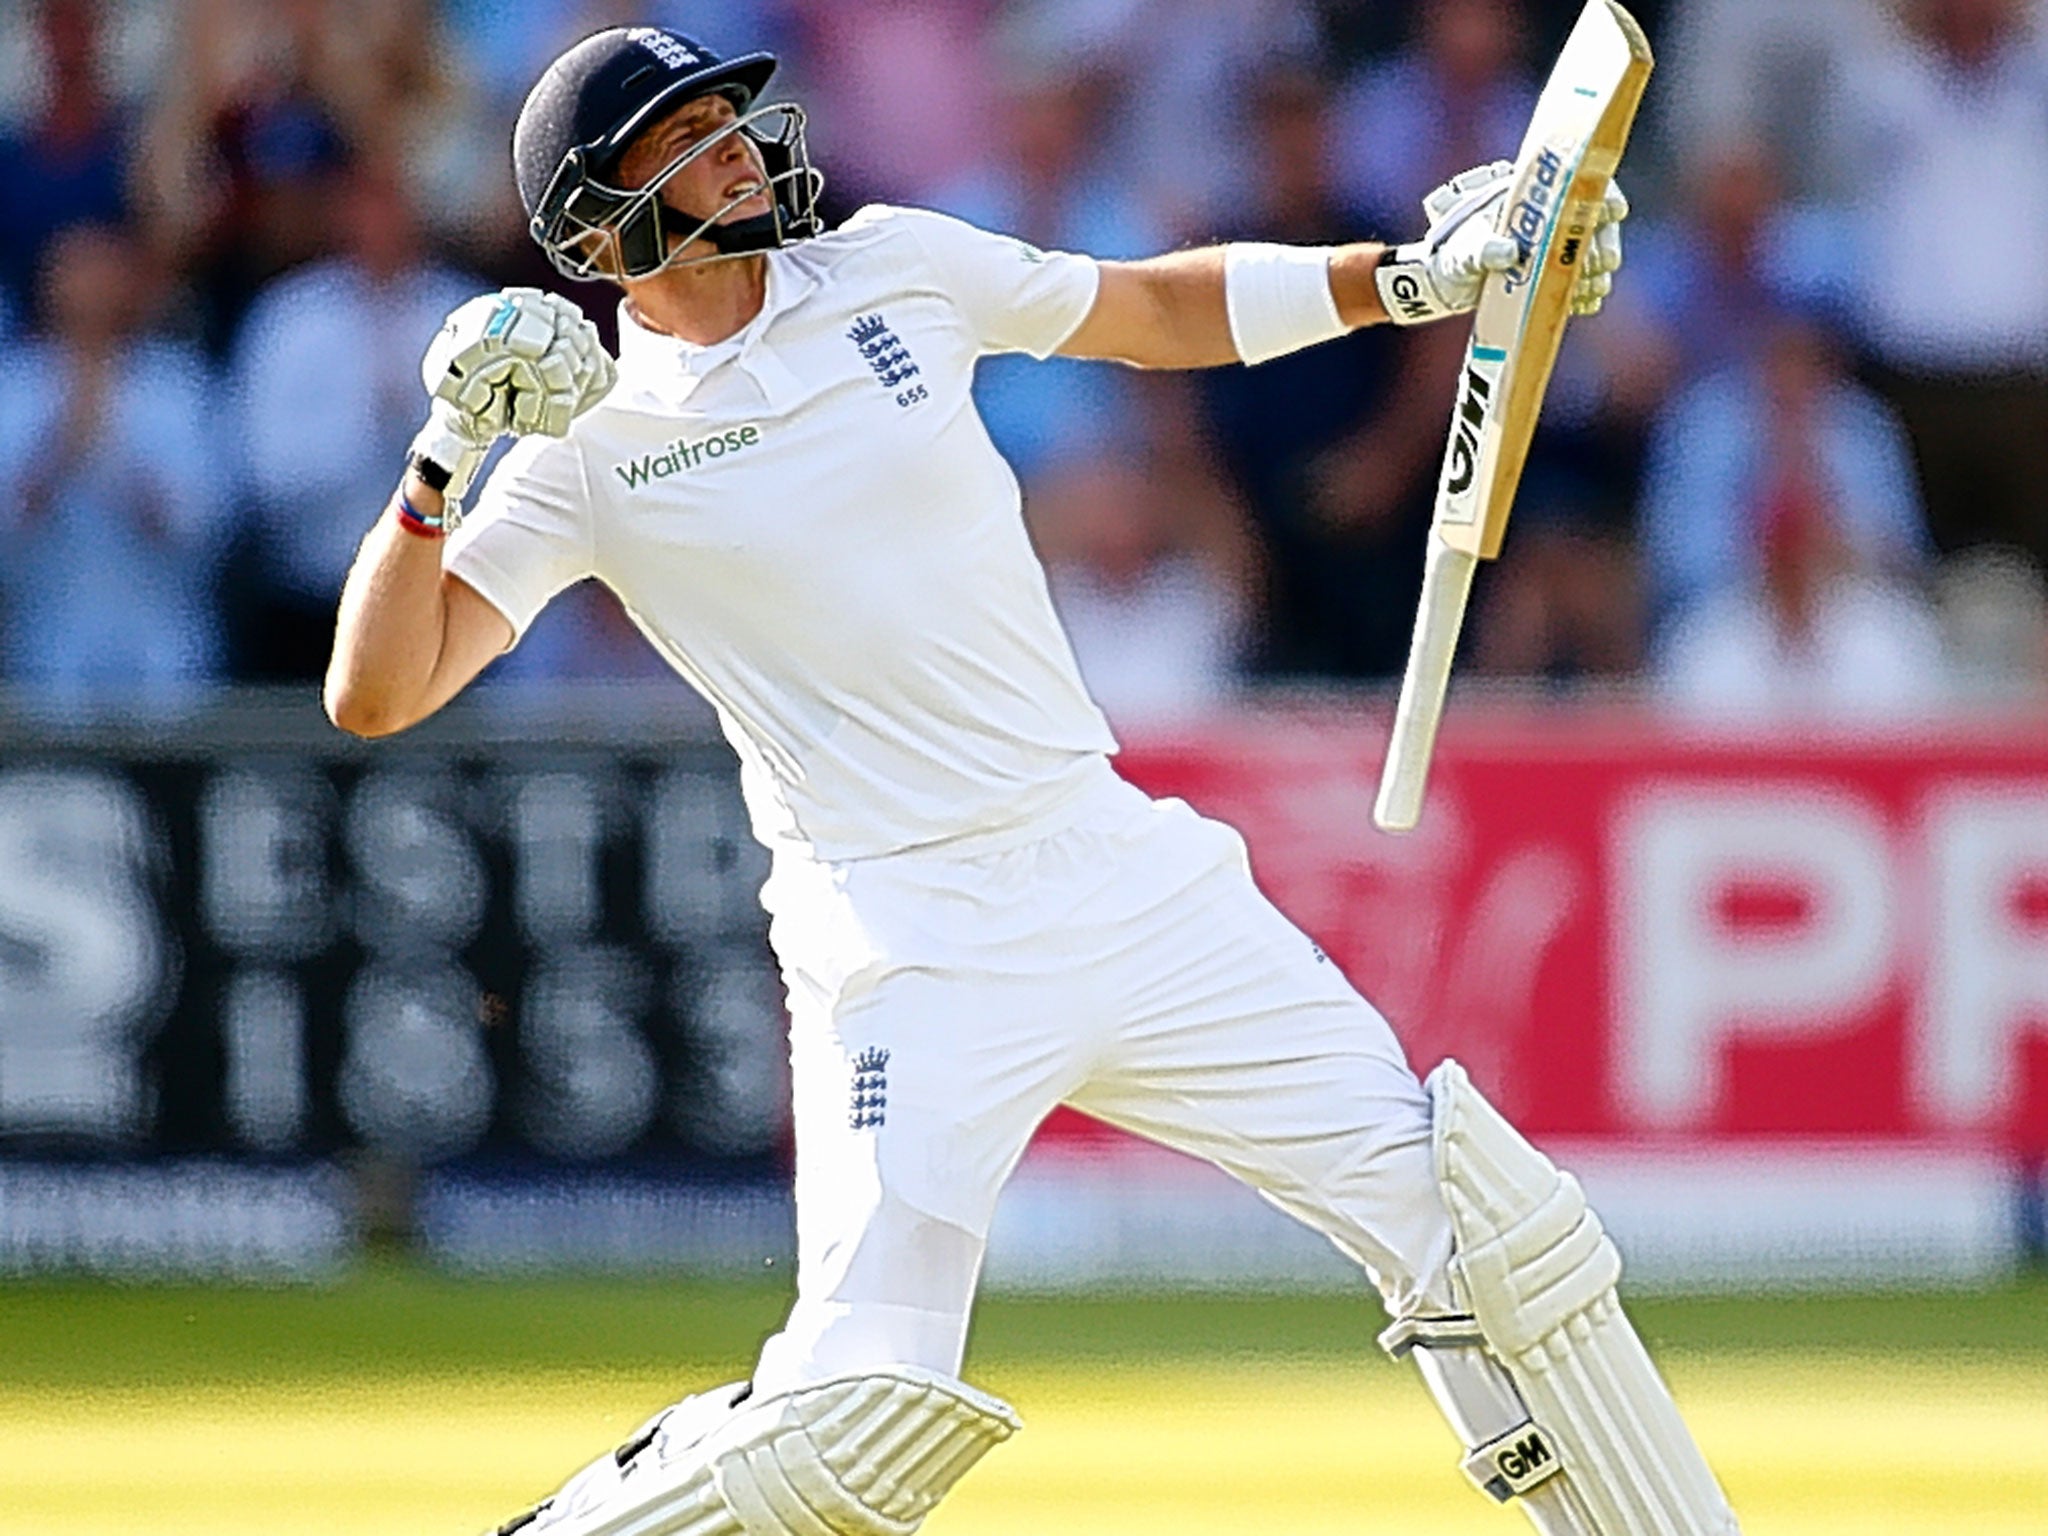 England batsman Joe Root celebrates after reaching his century against Sri Lanka in the first Test at Lord’s last year